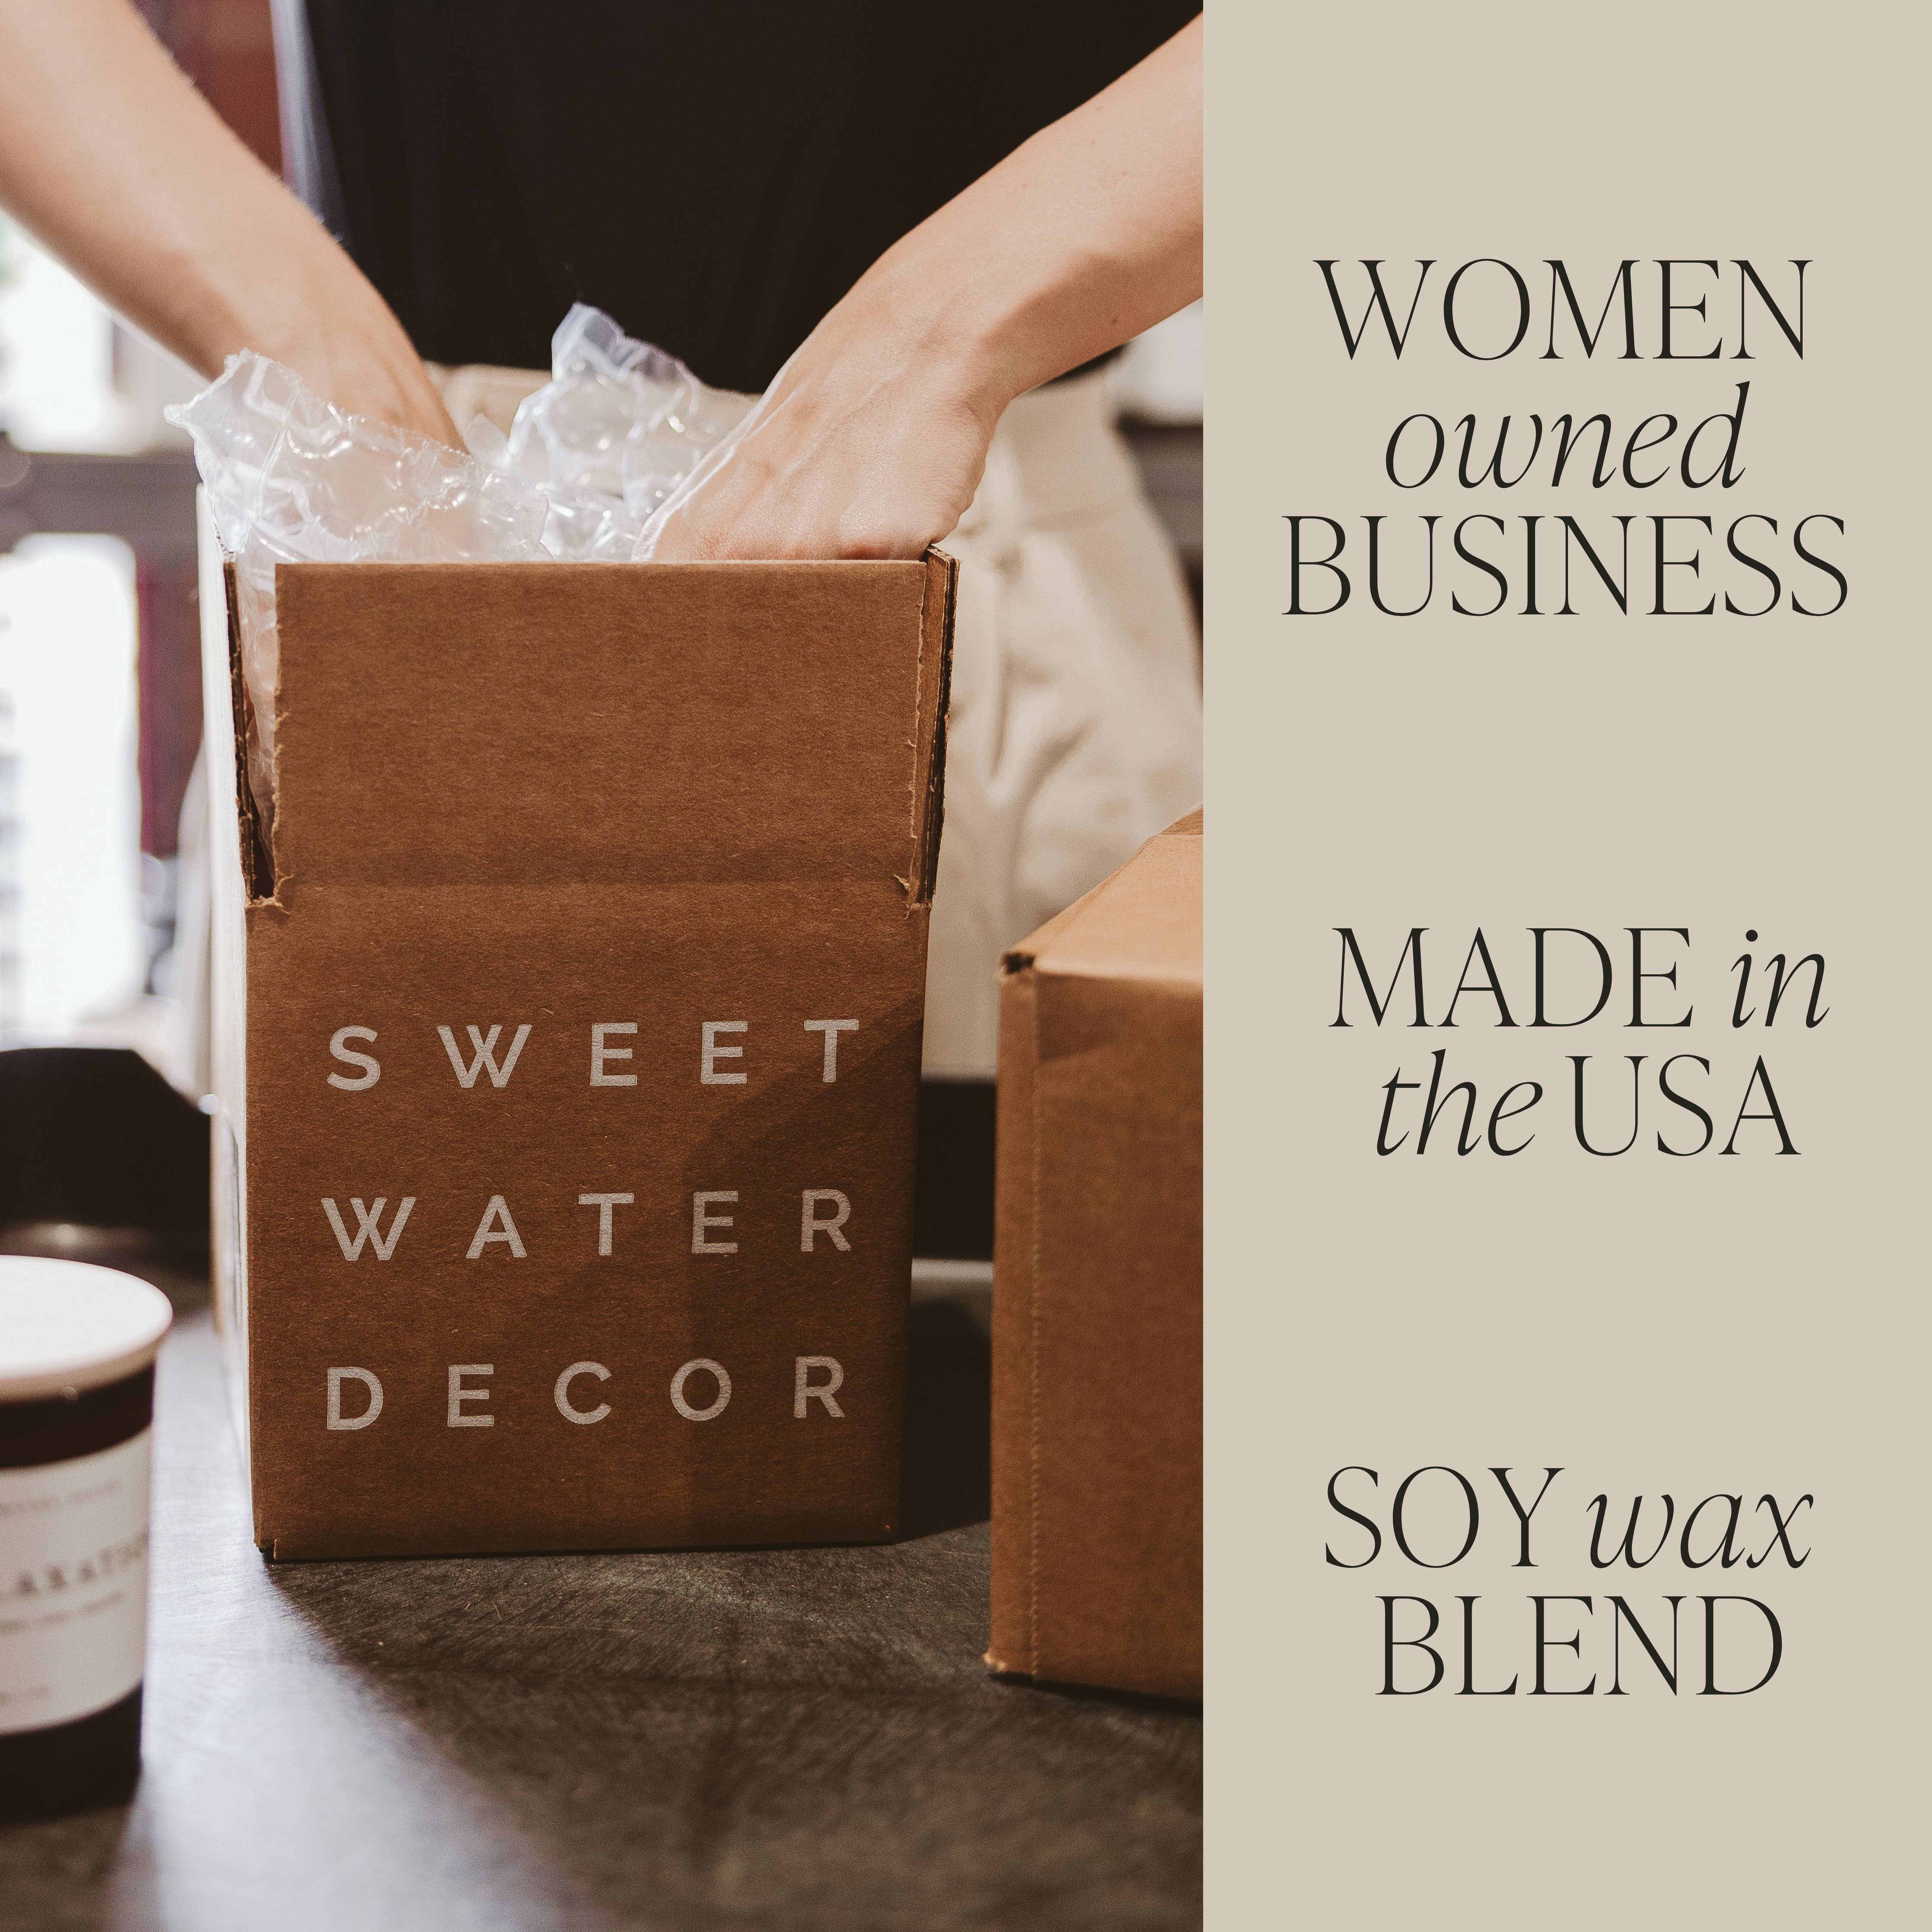 Sweet Water Decor - By The Fireside 15 oz Soy Candle, Matte Jar - Decor